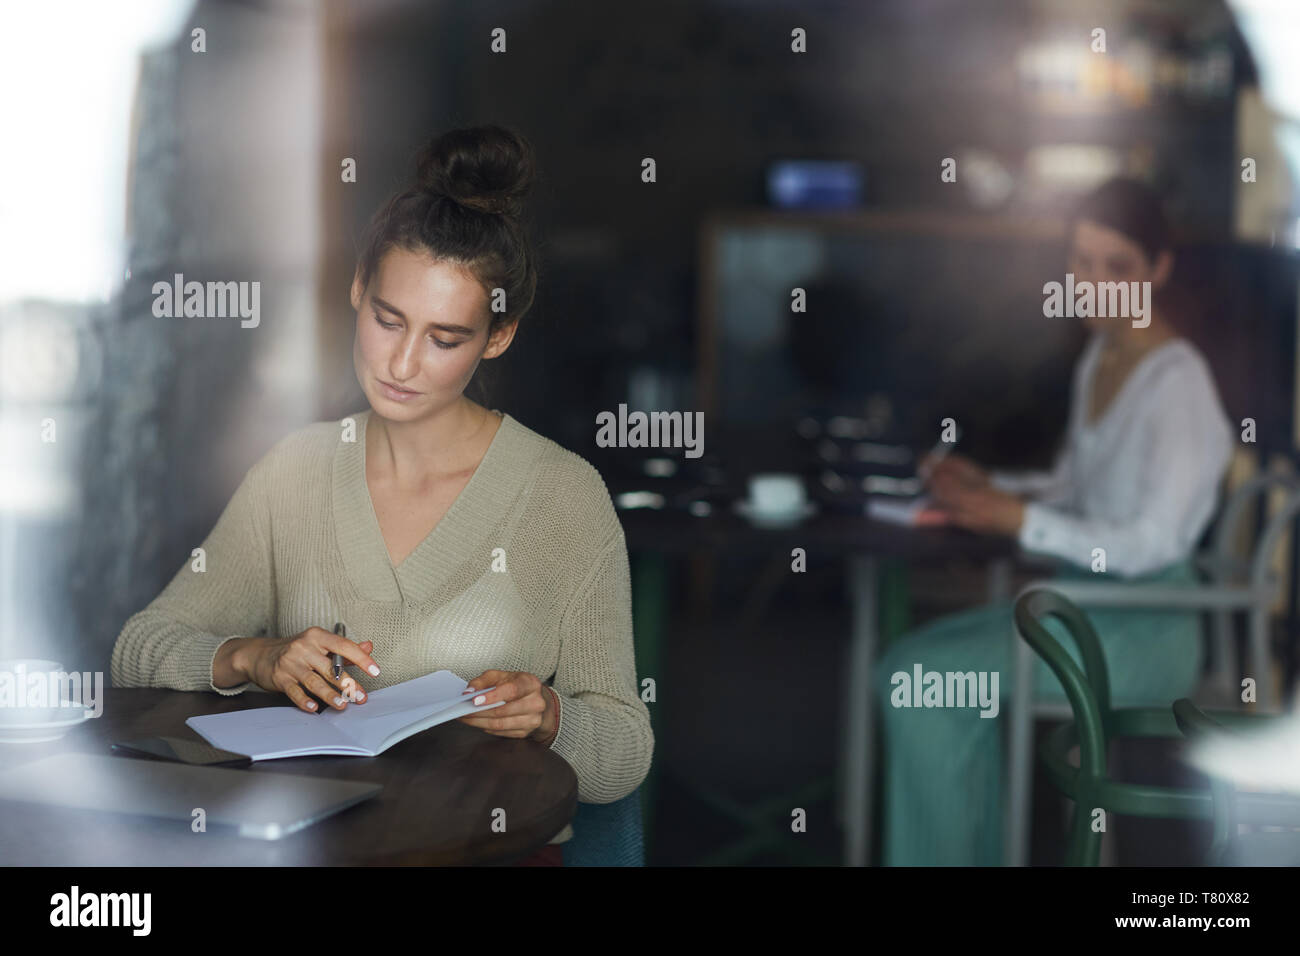 Reading notes in cafe Stock Photo